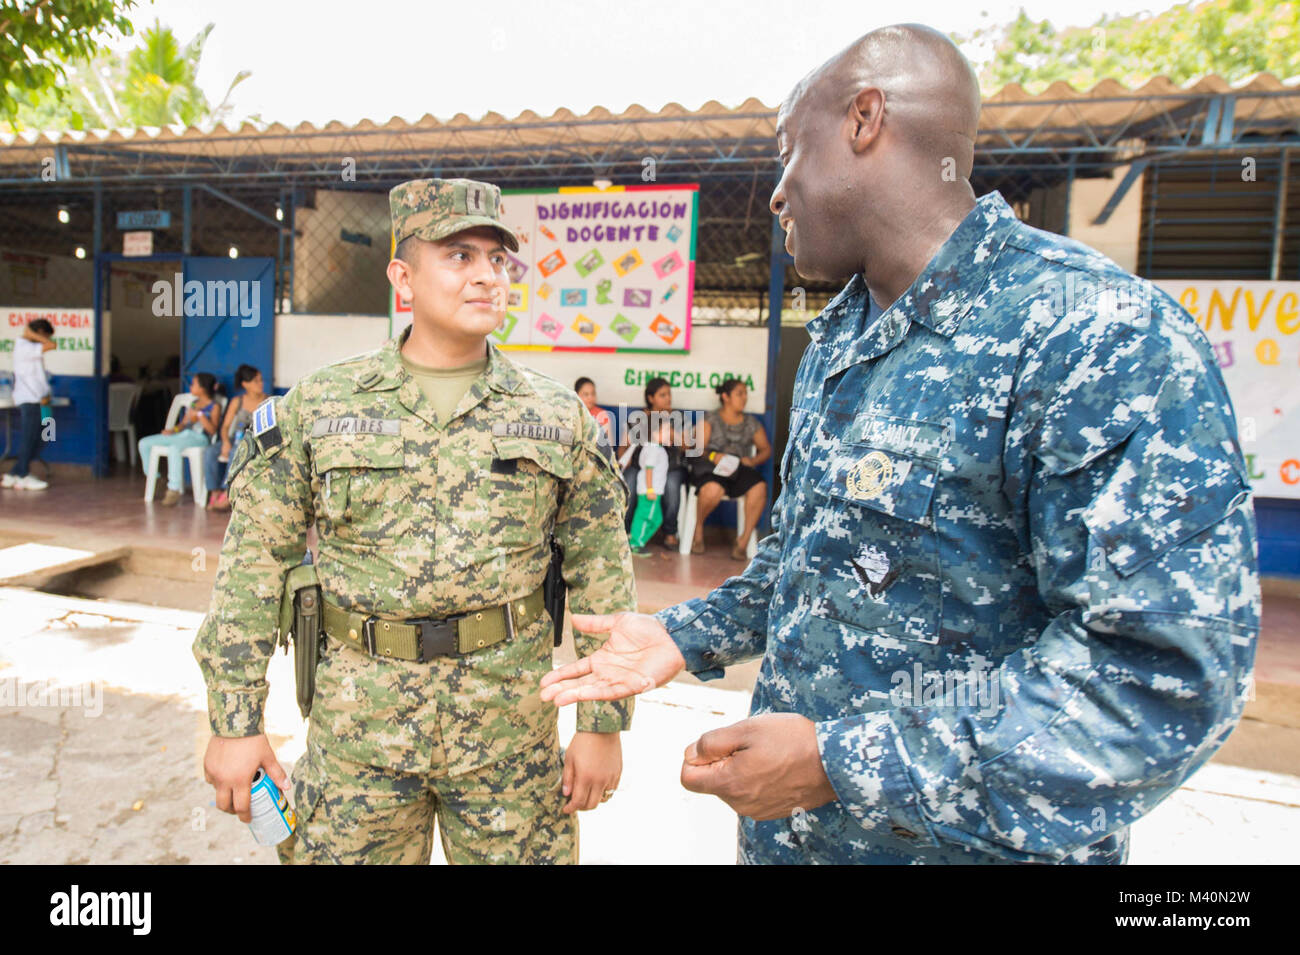 150617-N-PD309-237 SAN JULIAN, El Salvador (June 17, 2015) Musician 2nd Class Vince Moody, right, a native of Severn Md., assigned to the U.S. Fleet Forces Band, Uncharted Waters, speaks to a member of the Salvadoran army at a medical site established at Centro Escolar Doctor Eduardo Enrique Barriento during Continuing Promise 2015. Continuing Promise is a U.S. Southern Command-sponsored and U.S. Naval Forces Southern Command/U.S. 4th Fleet-conducted deployment to conduct civil-military operations including humanitarian-civil assistance, subject matter expert exchanges, medical, dental, veteri Stock Photo